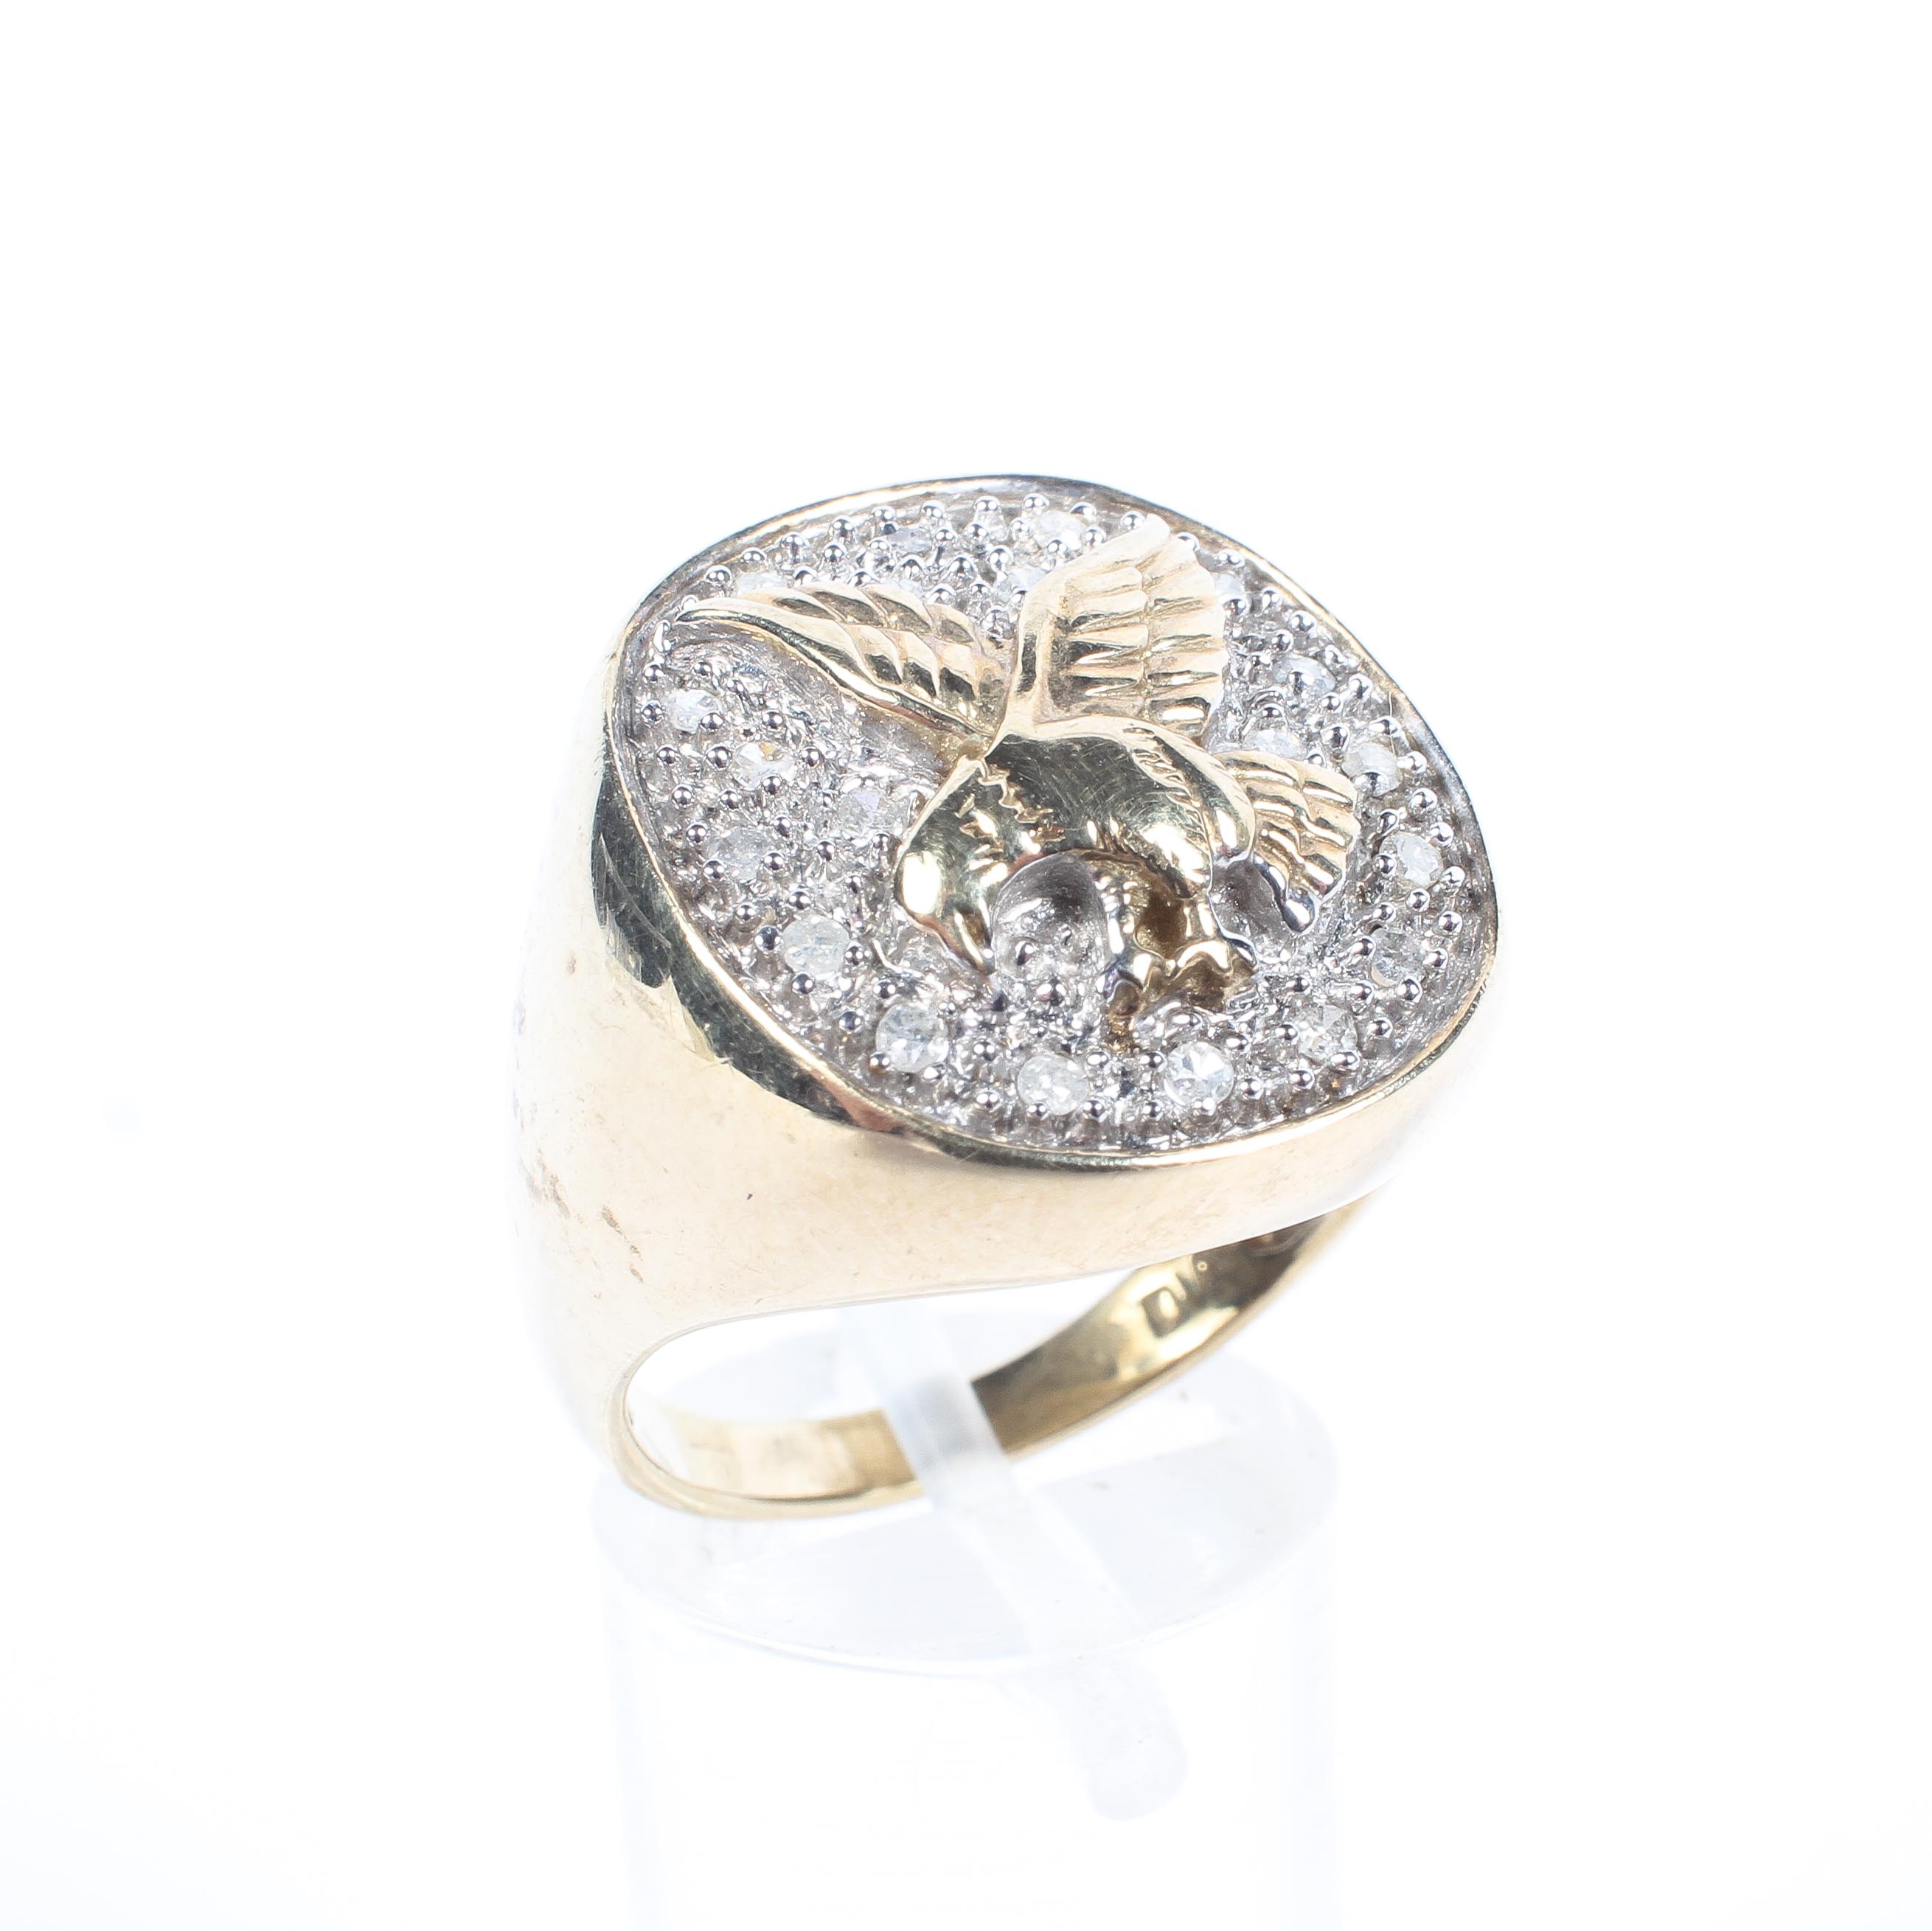 A 9ct gold and diamond gentleman's signet ring,